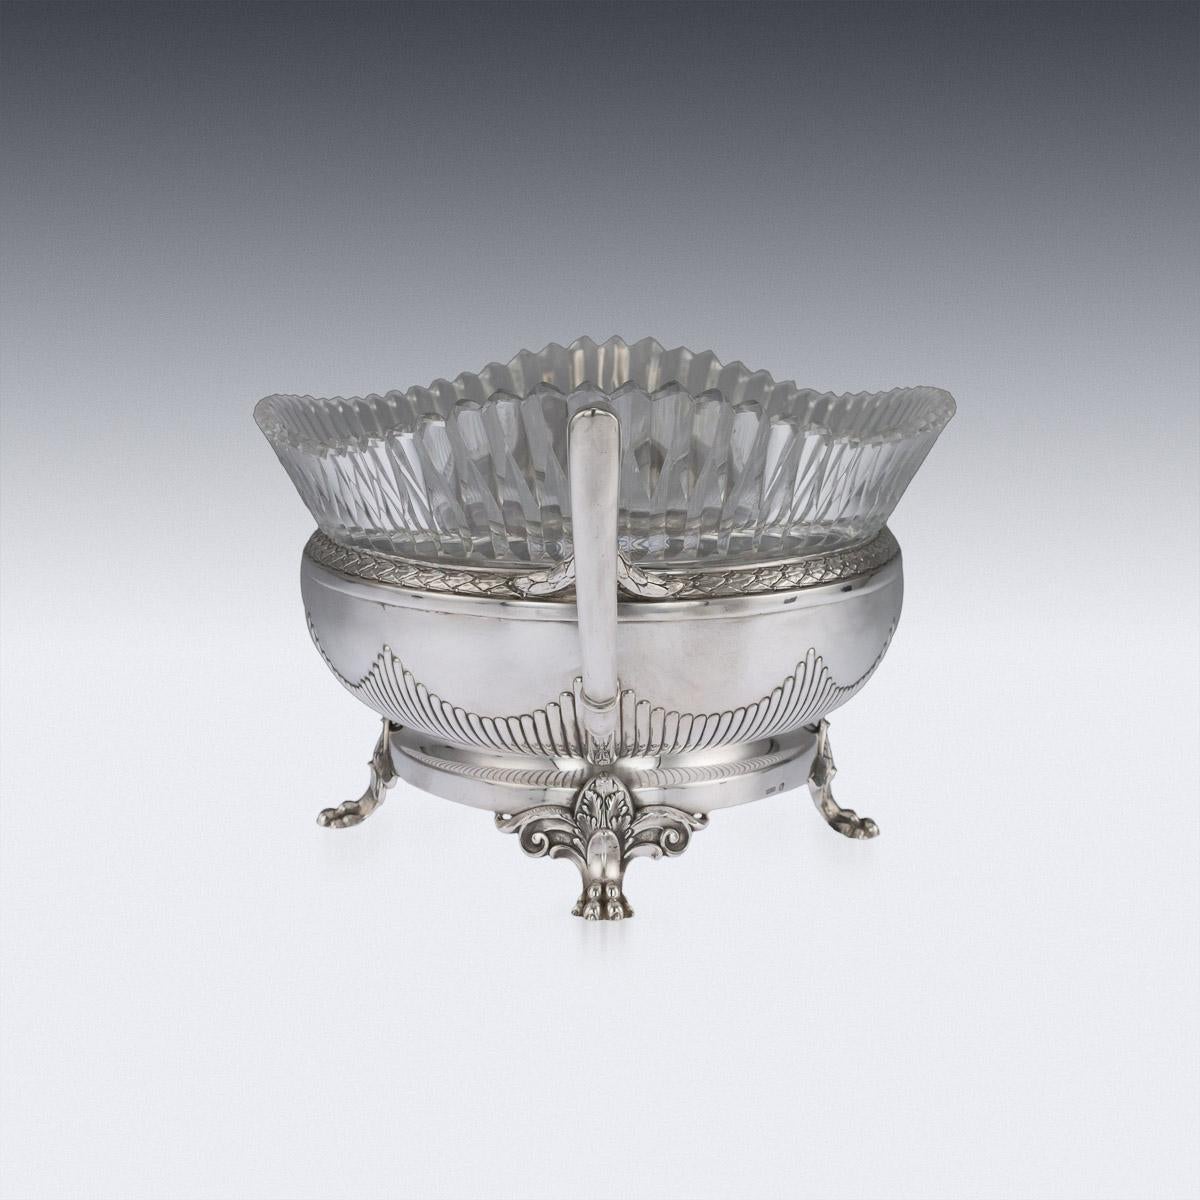 Antique early 20th century Russian empire style solid silver and cut glass jardinière, oval shaped and mounted with geometrical twin handles, boarders embellished with laurel leaves and half fluted design along the base, standing on four leaf capped